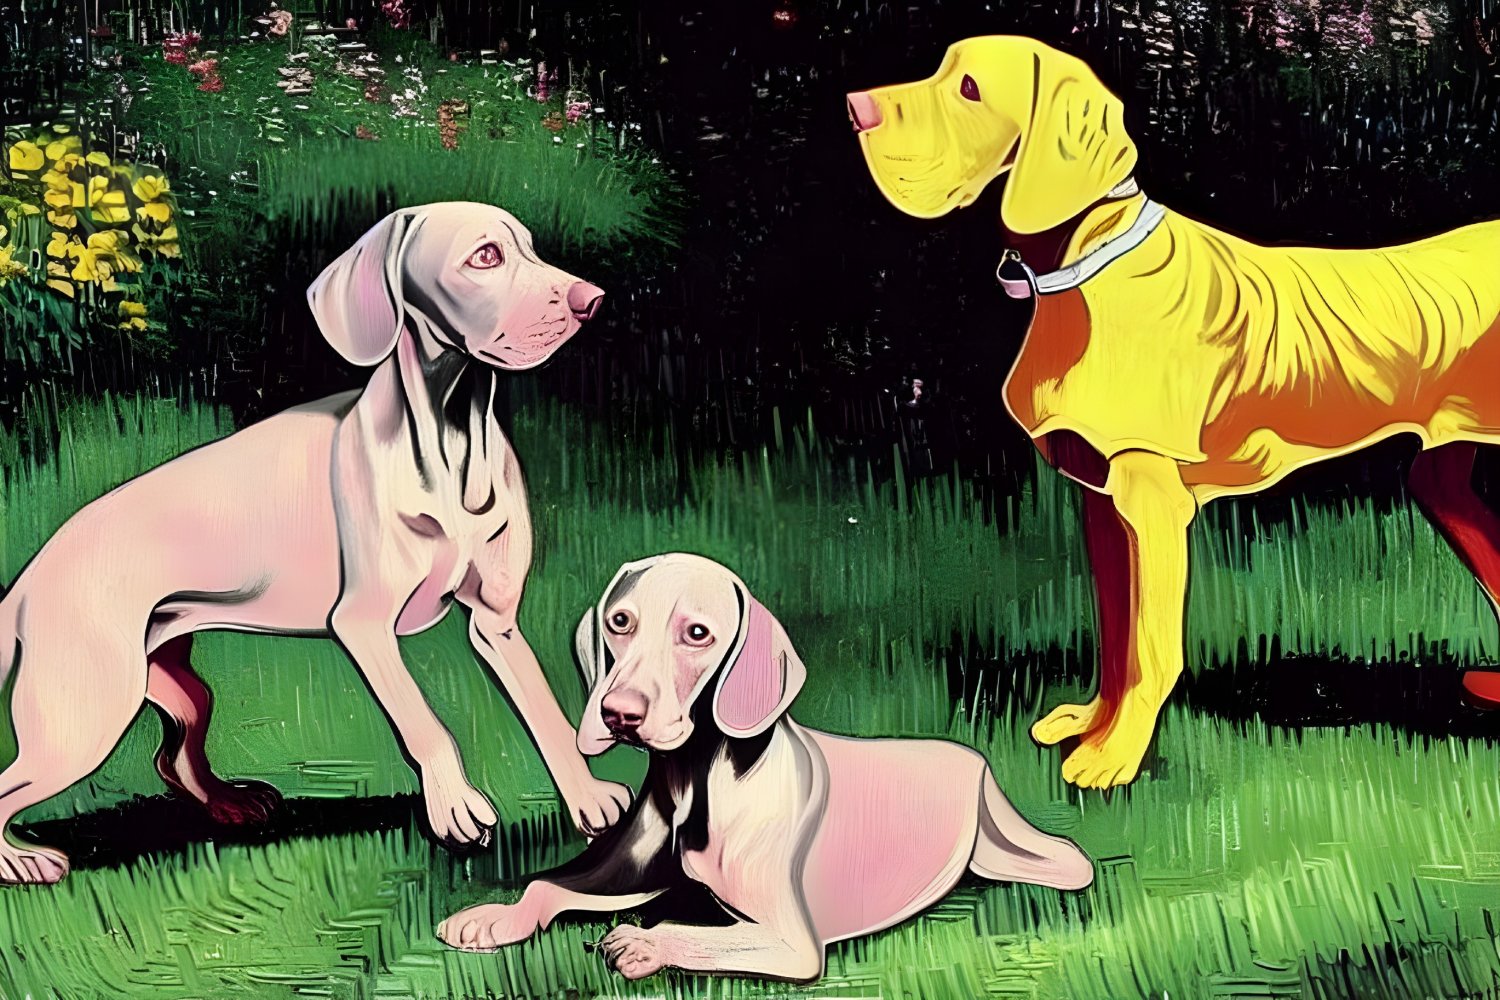 Stylized dogs in colorful grassy setting